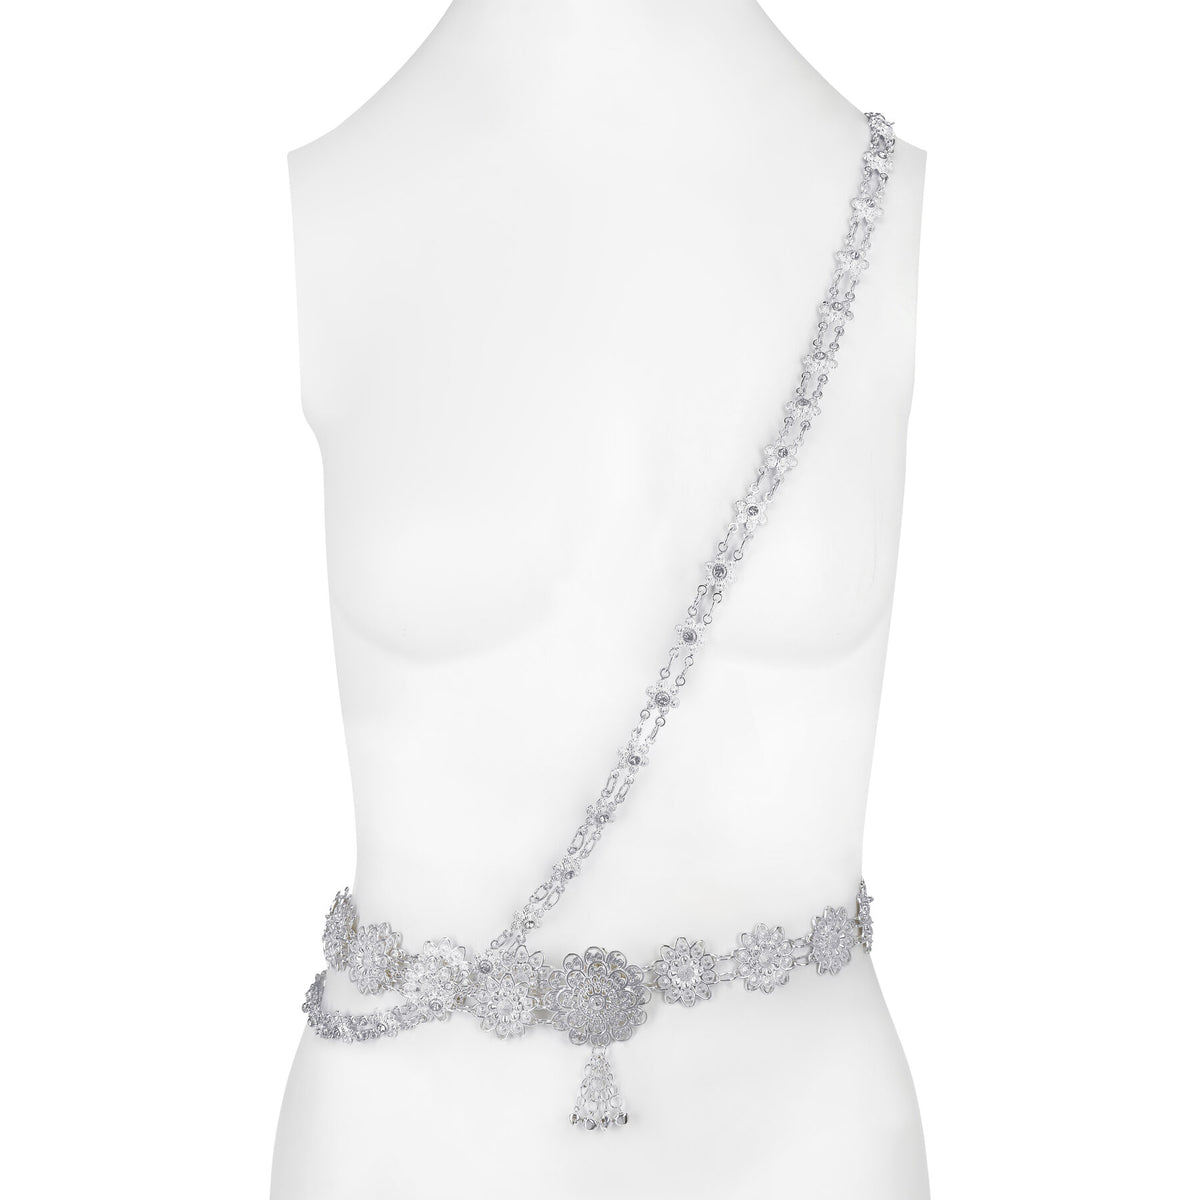 A silver Thai belt and body chain jewelry set.